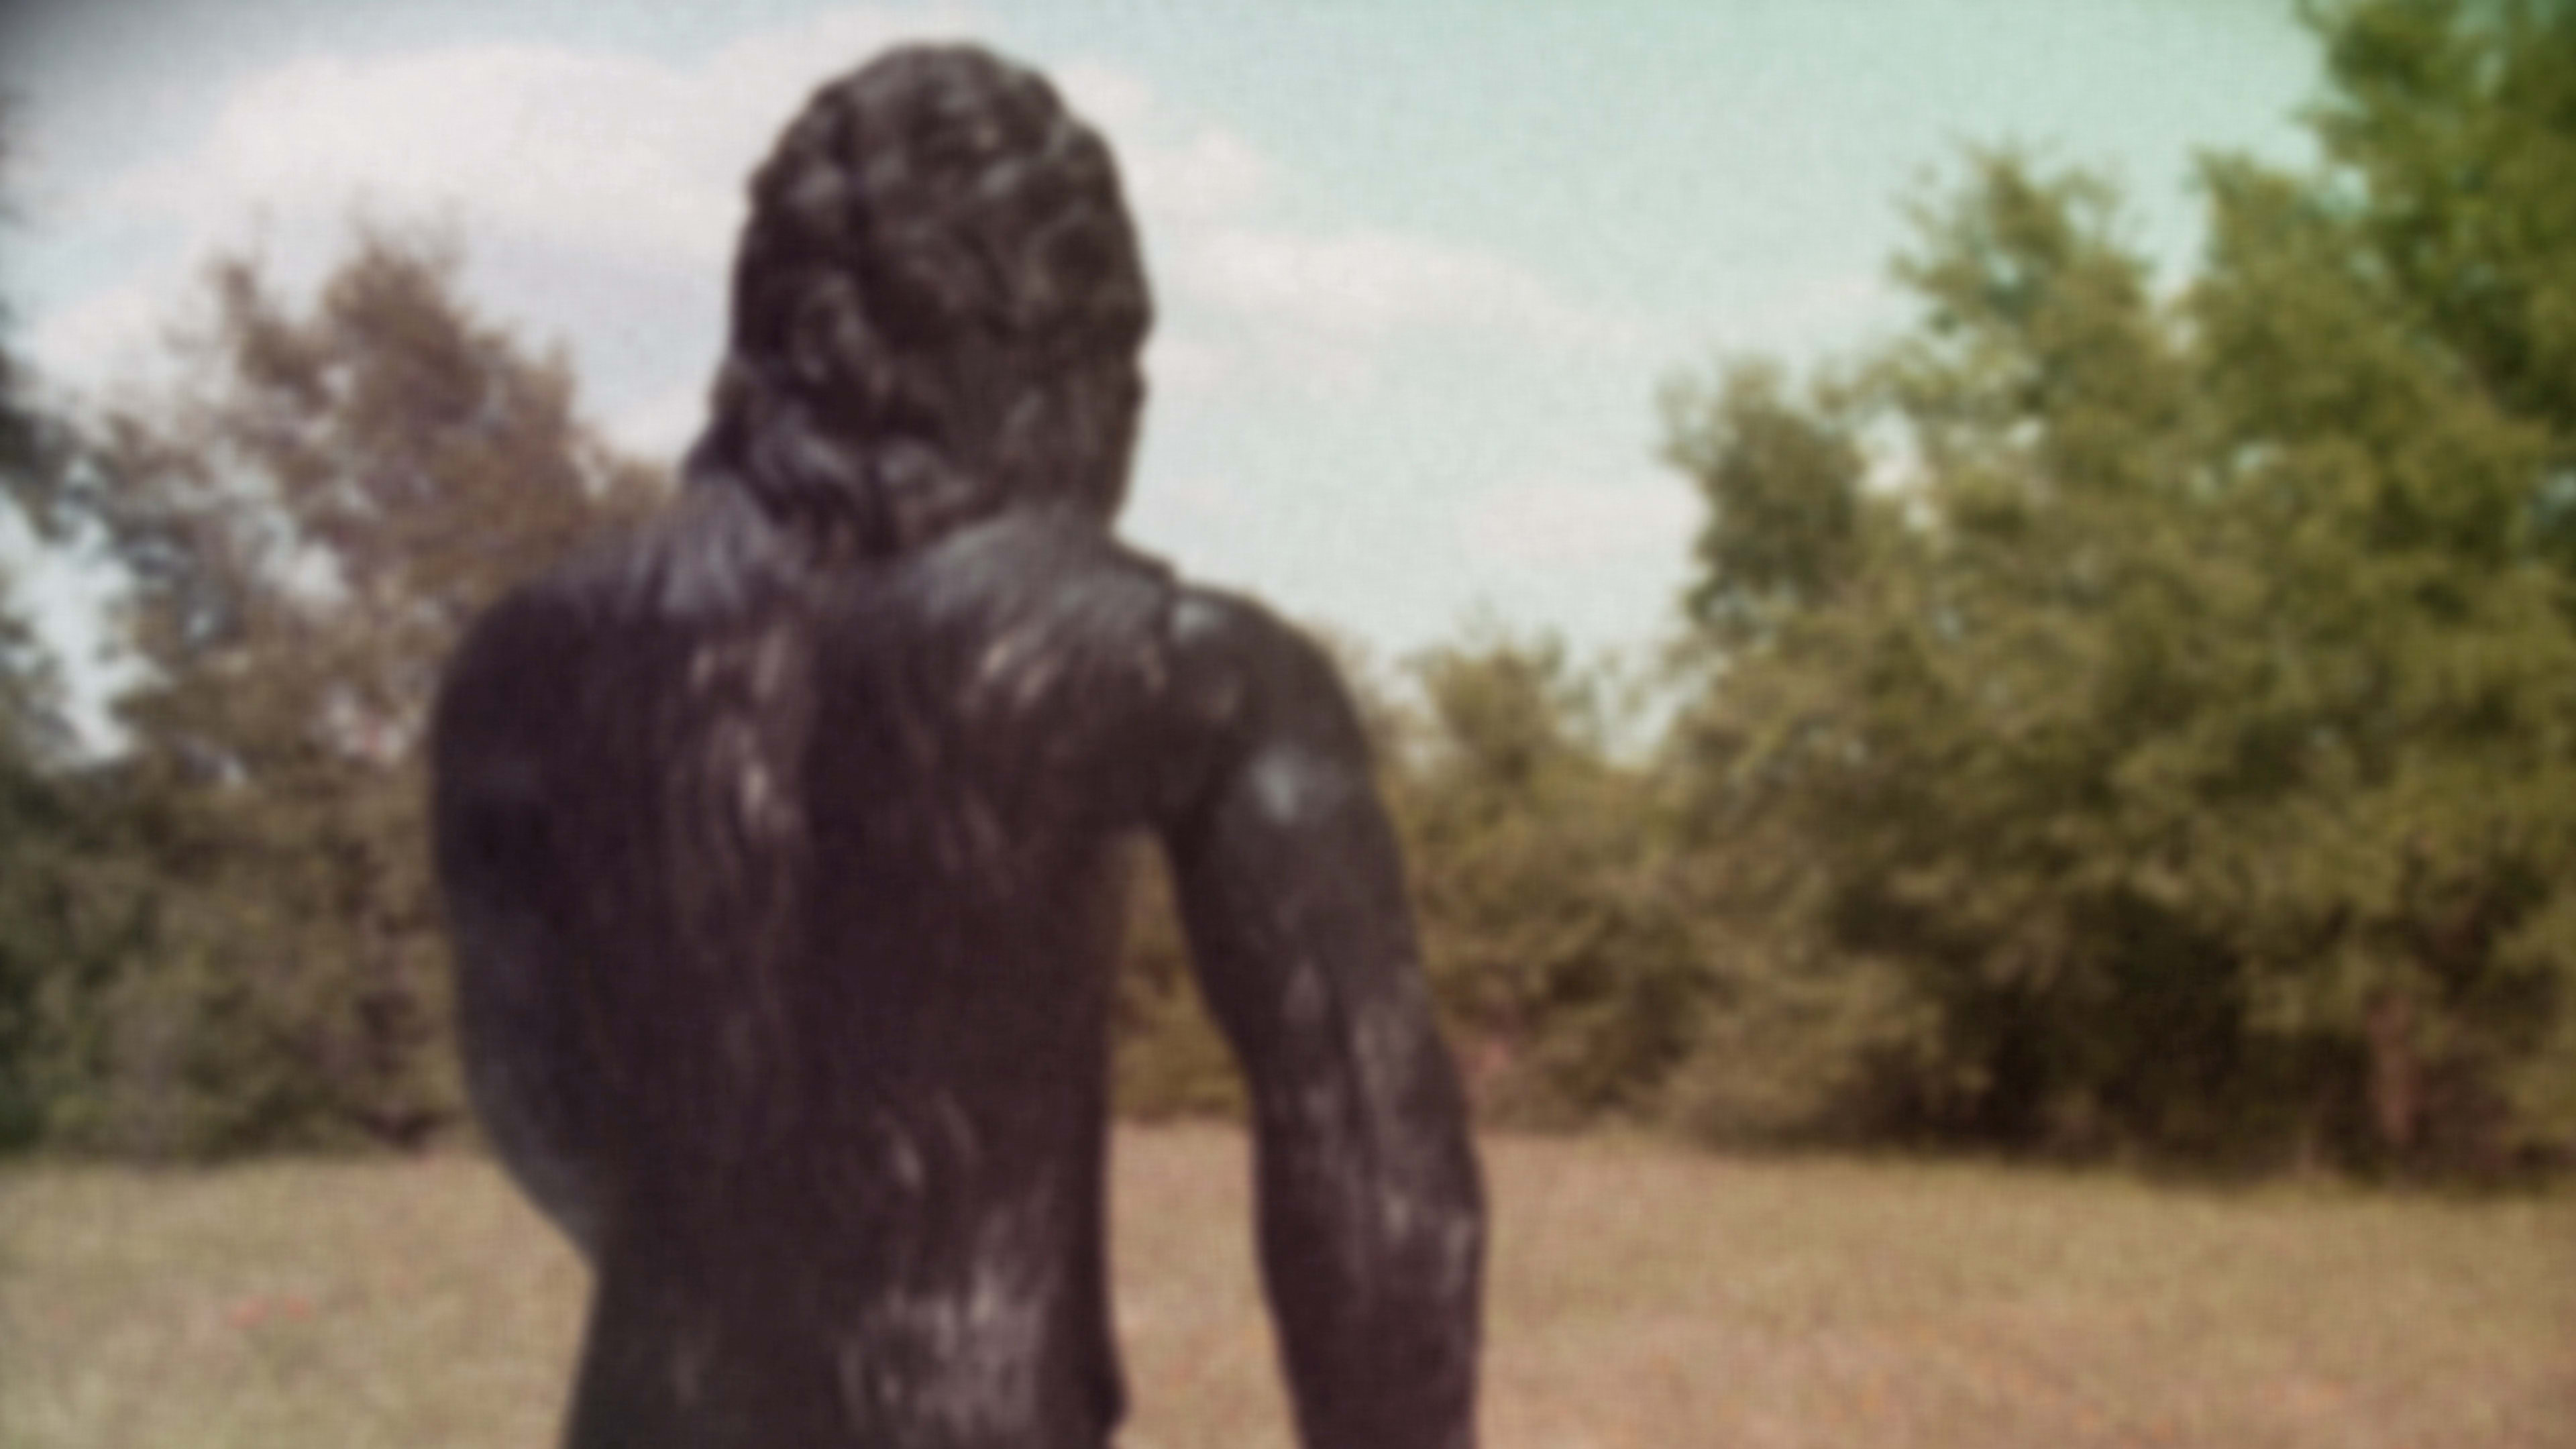 Note to Pizza Hut: Please check why “Bigfoot” is trending